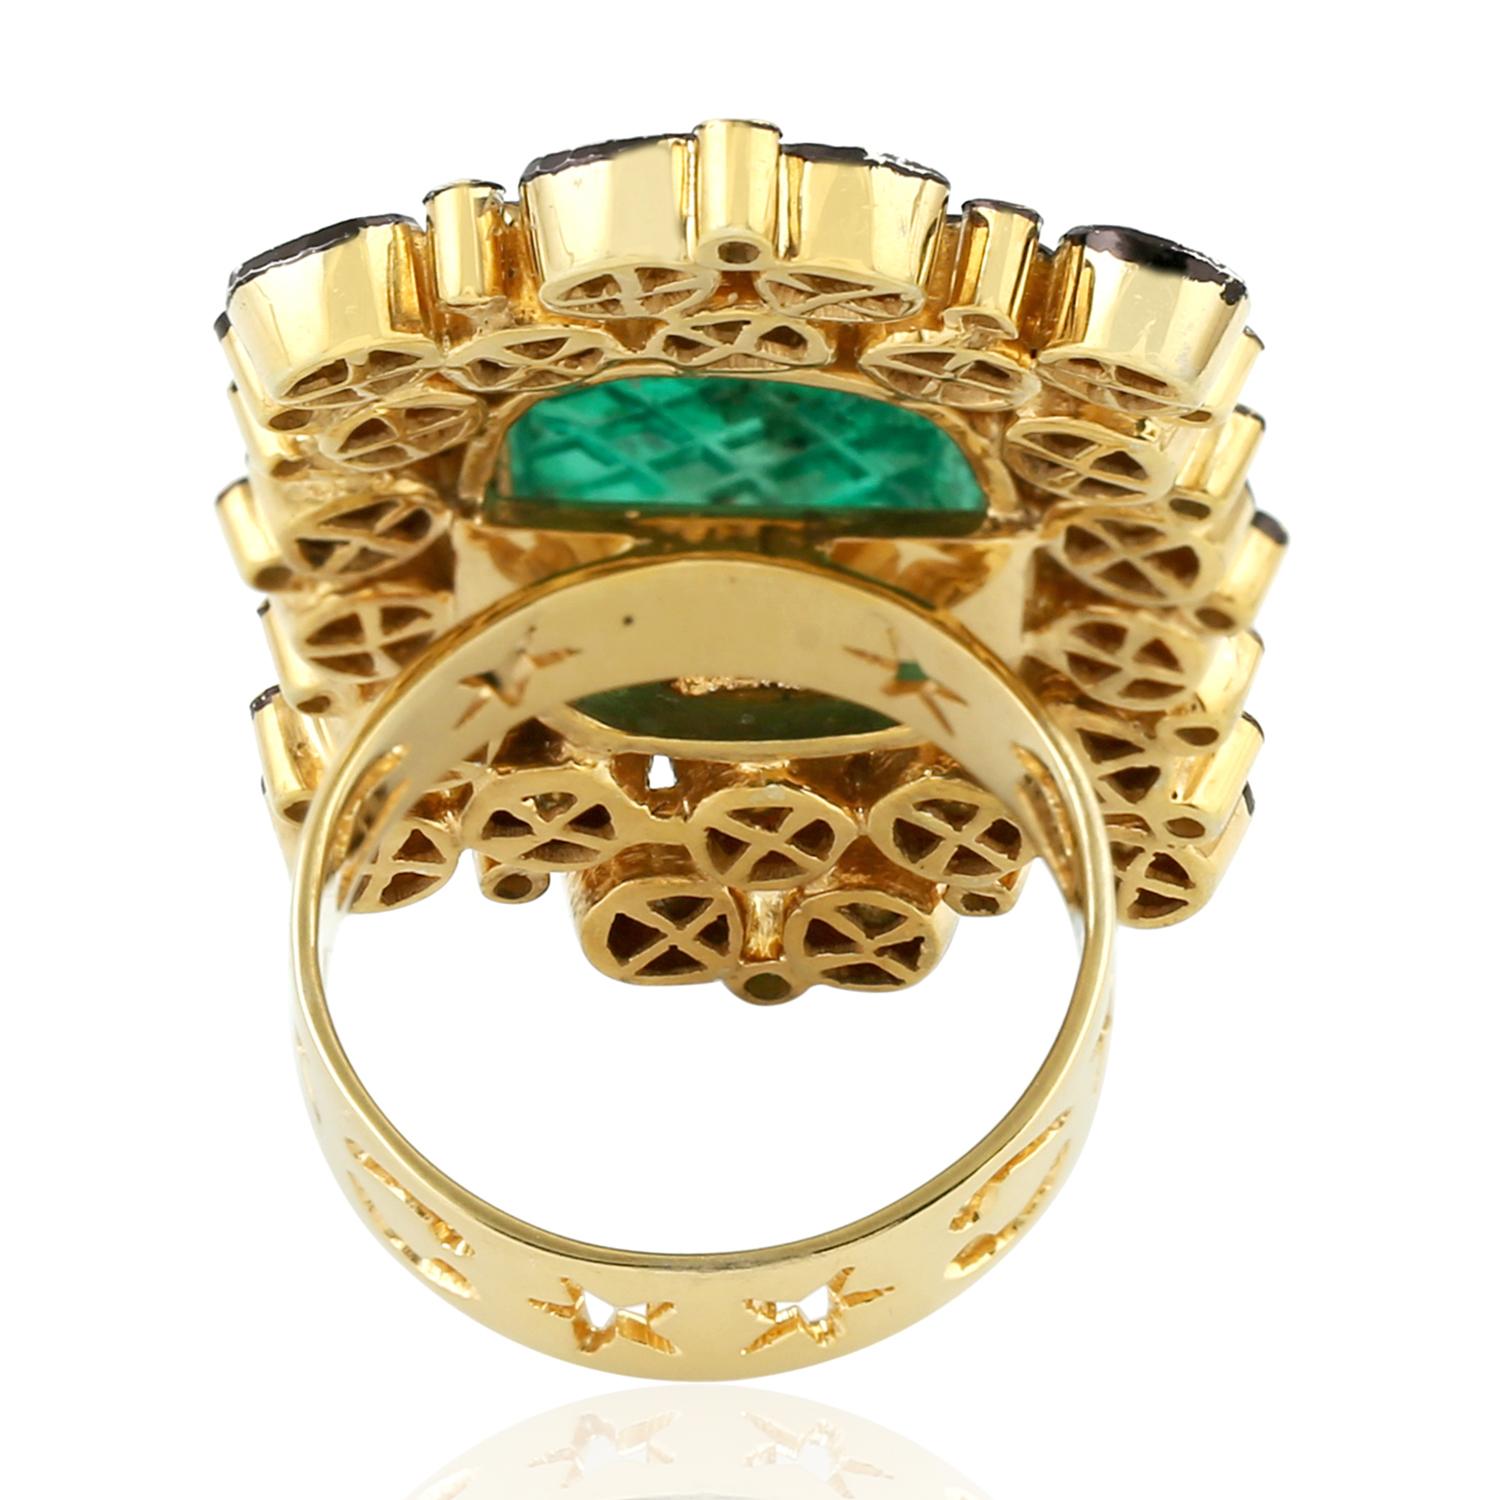 Contemporary 9.12 Carat Carved Emerald Rose cut Diamond Cocktail Ring